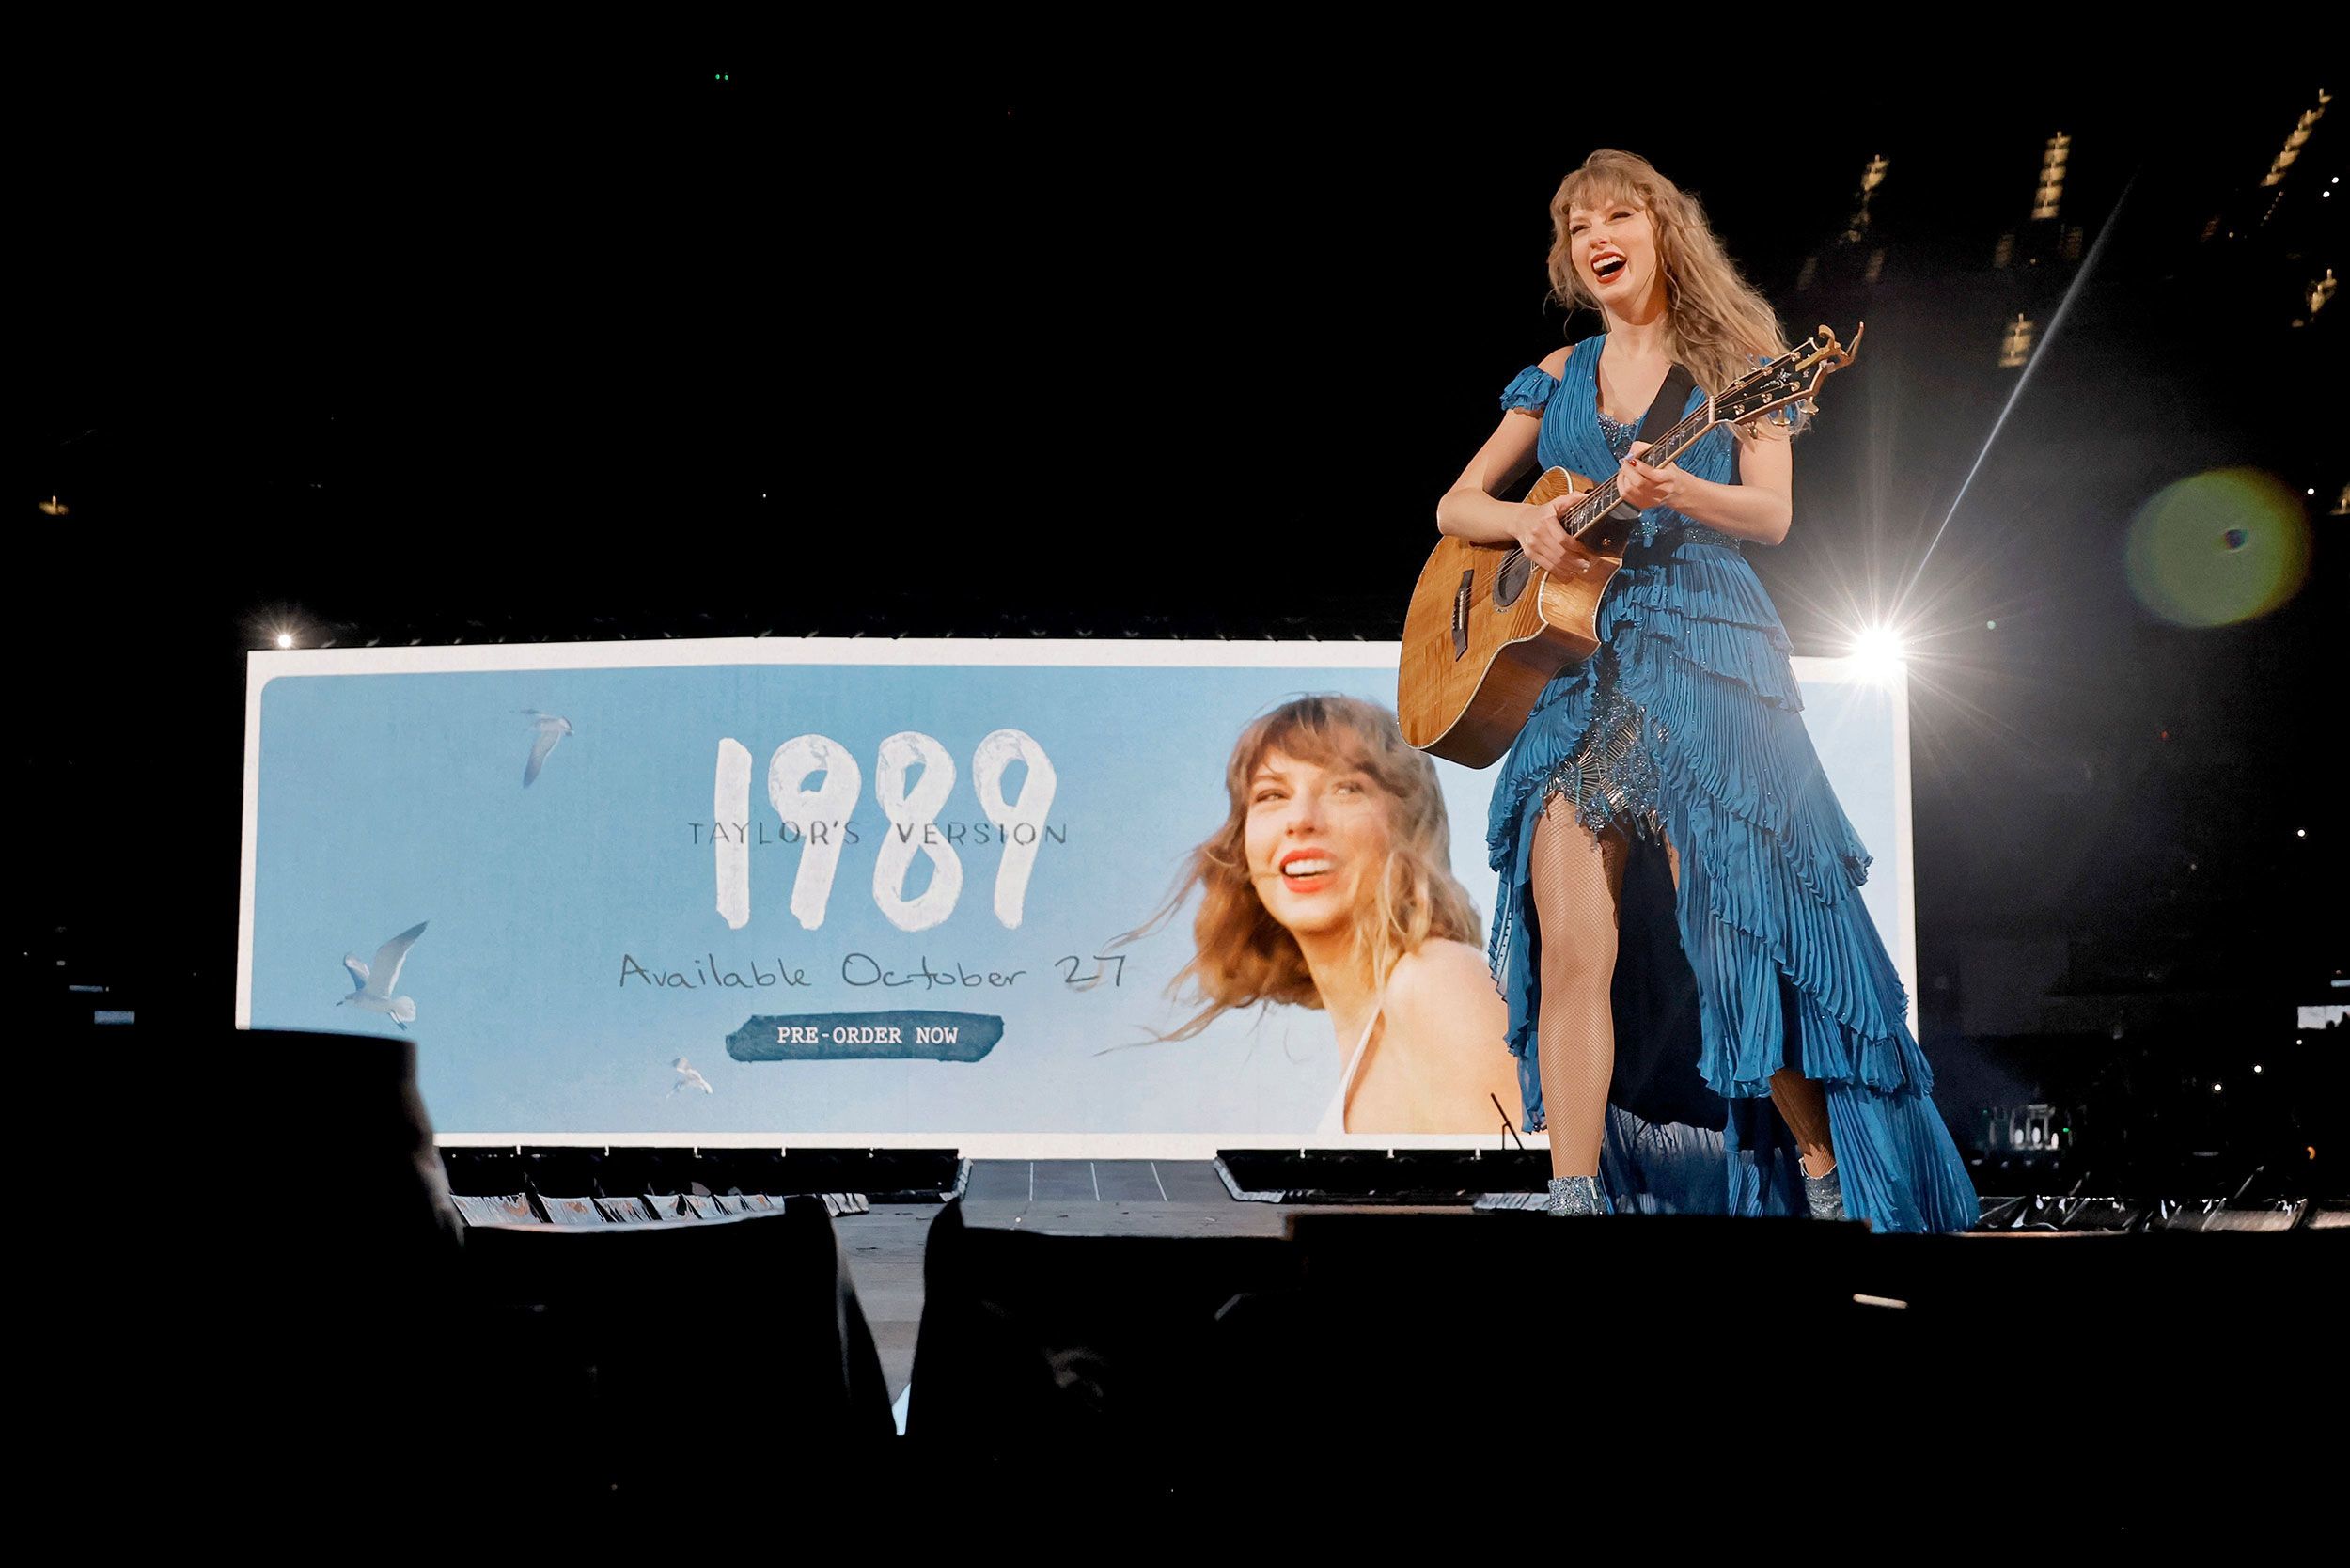 Taylor Swift Eras tour movie: How the film is creating two vastly